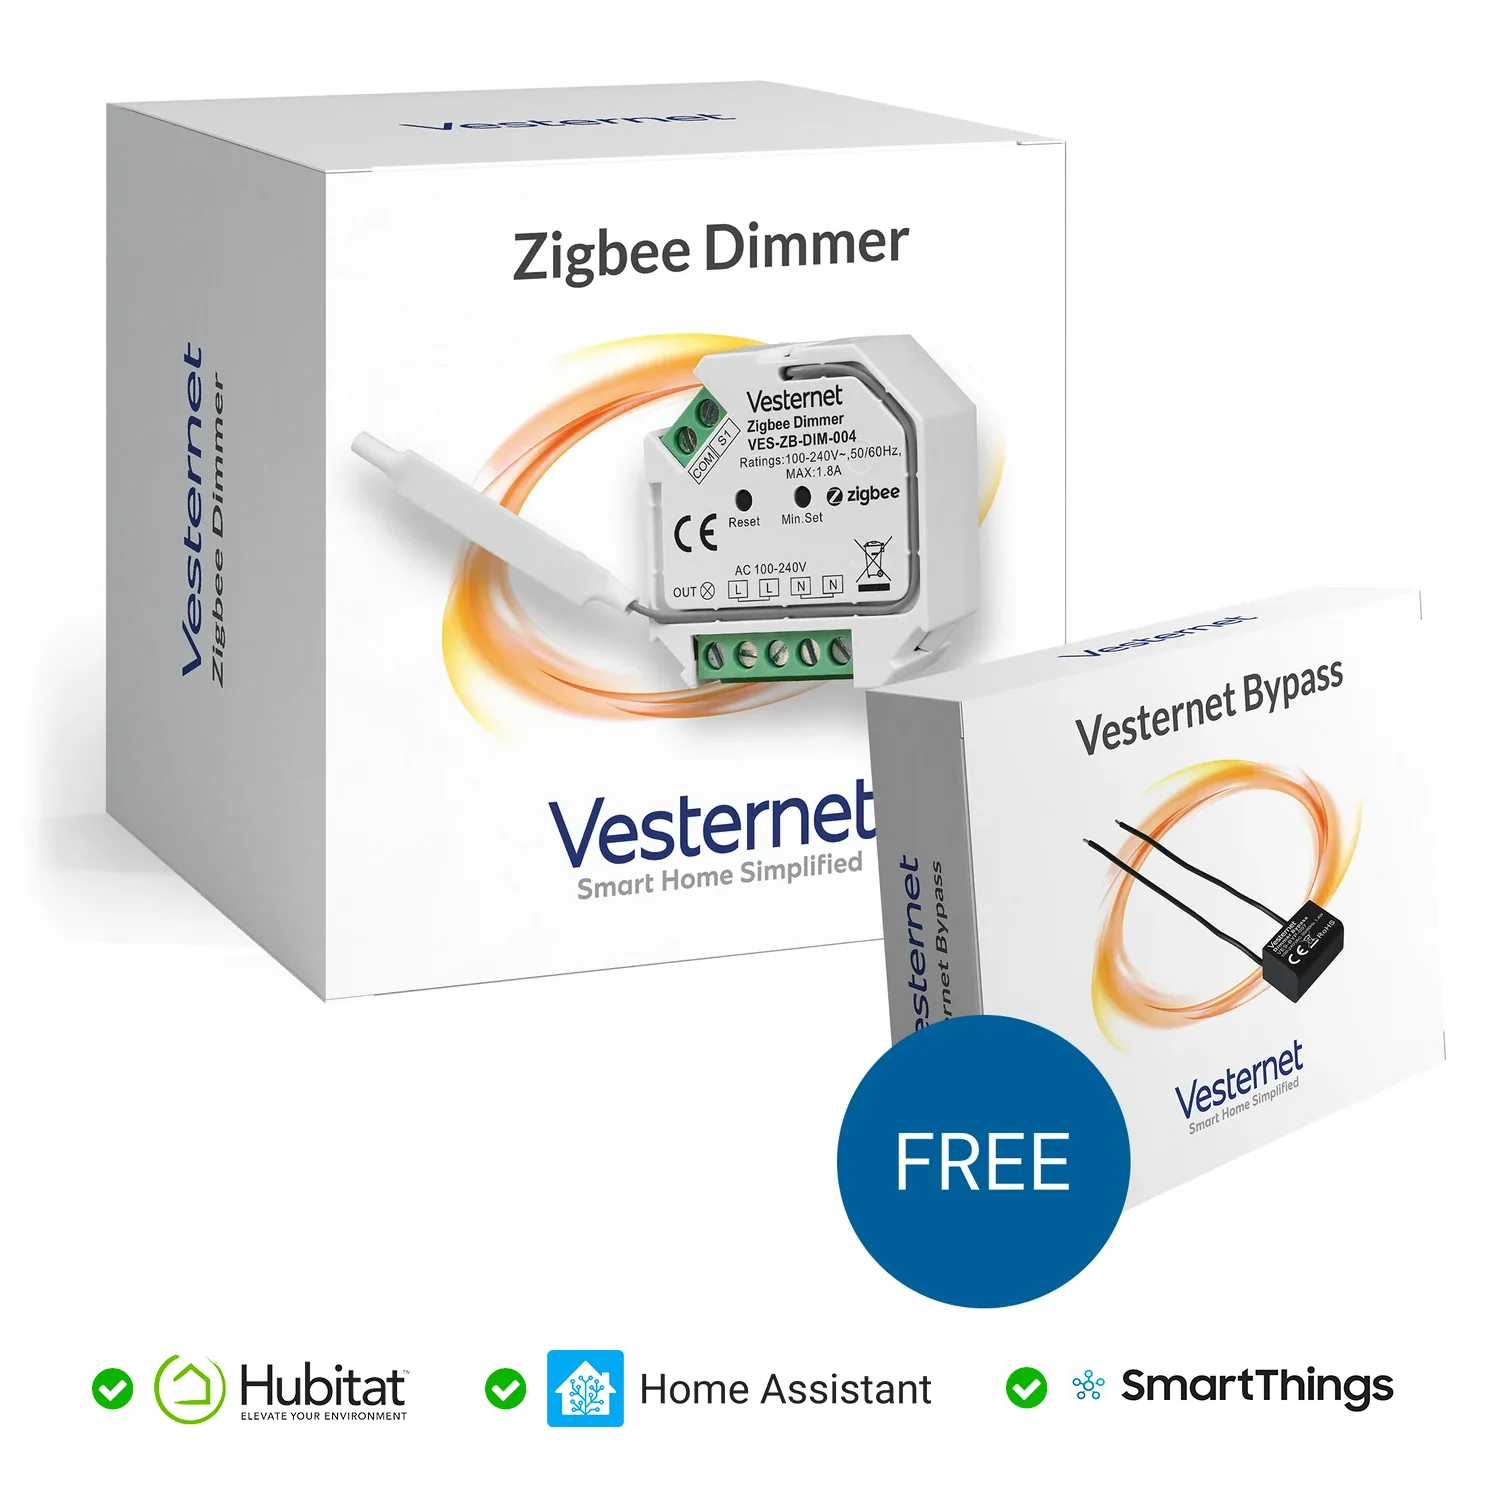 Does the Zigbee 3.0 dimmer have any metering capabilities?